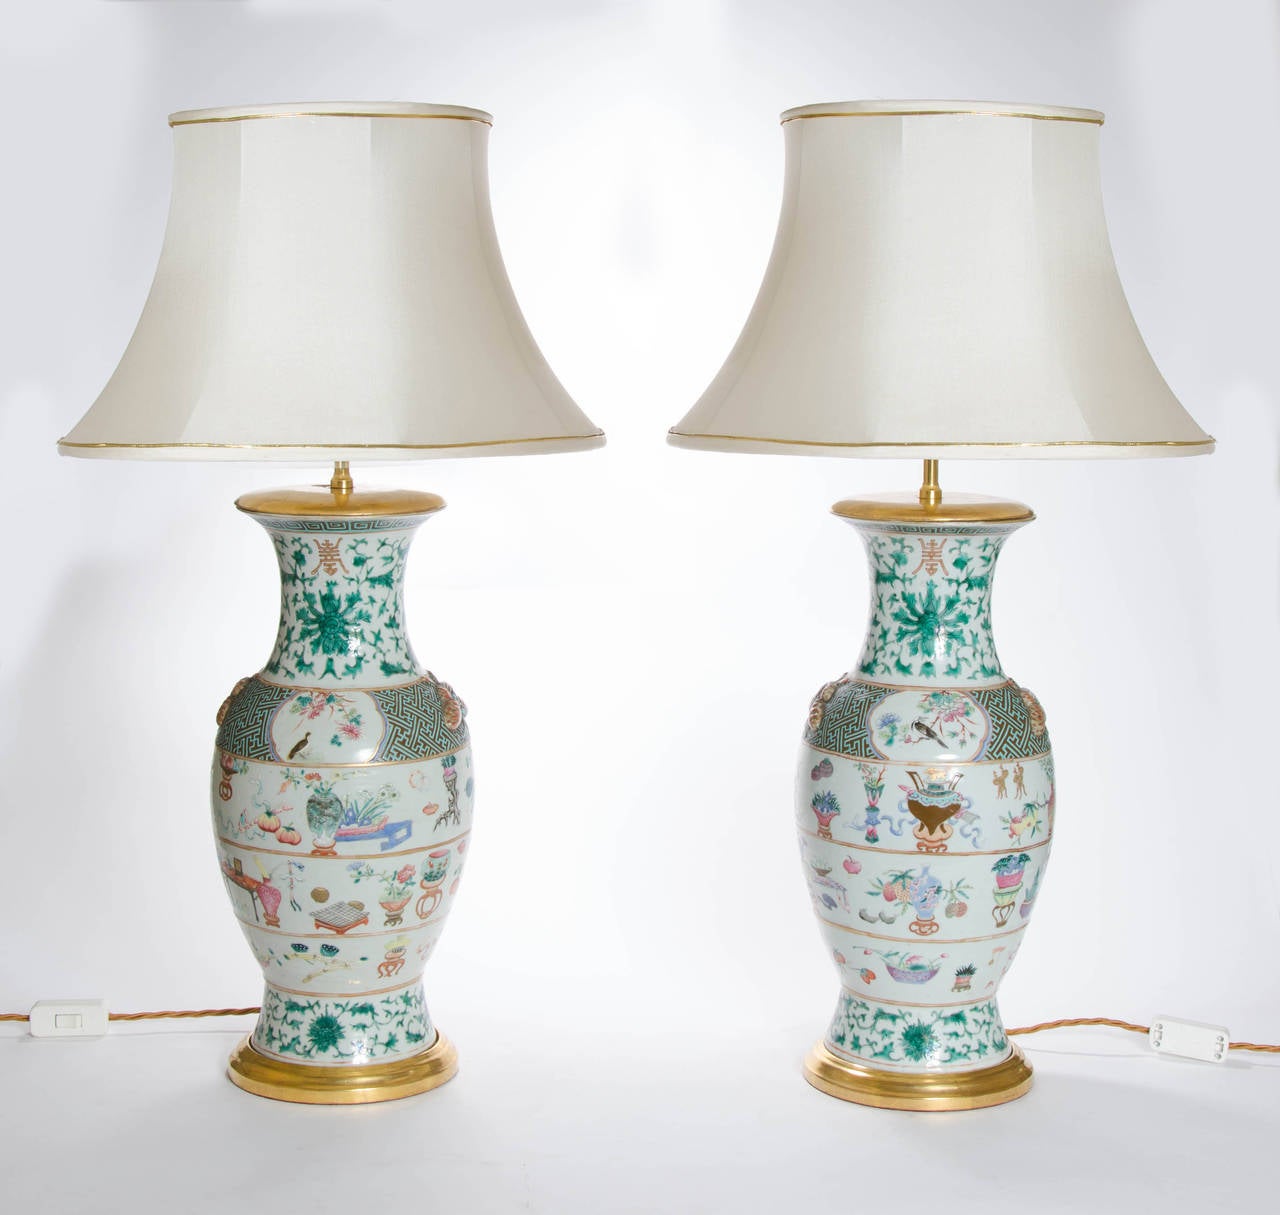 A fine pair of baluster vases as lamps, decorated with an array of symbolic objects, flowers, butterflies and lotus scrolls:
Chinese, Camille-rose, circa 1840. 

Height including shade: 87 cm.